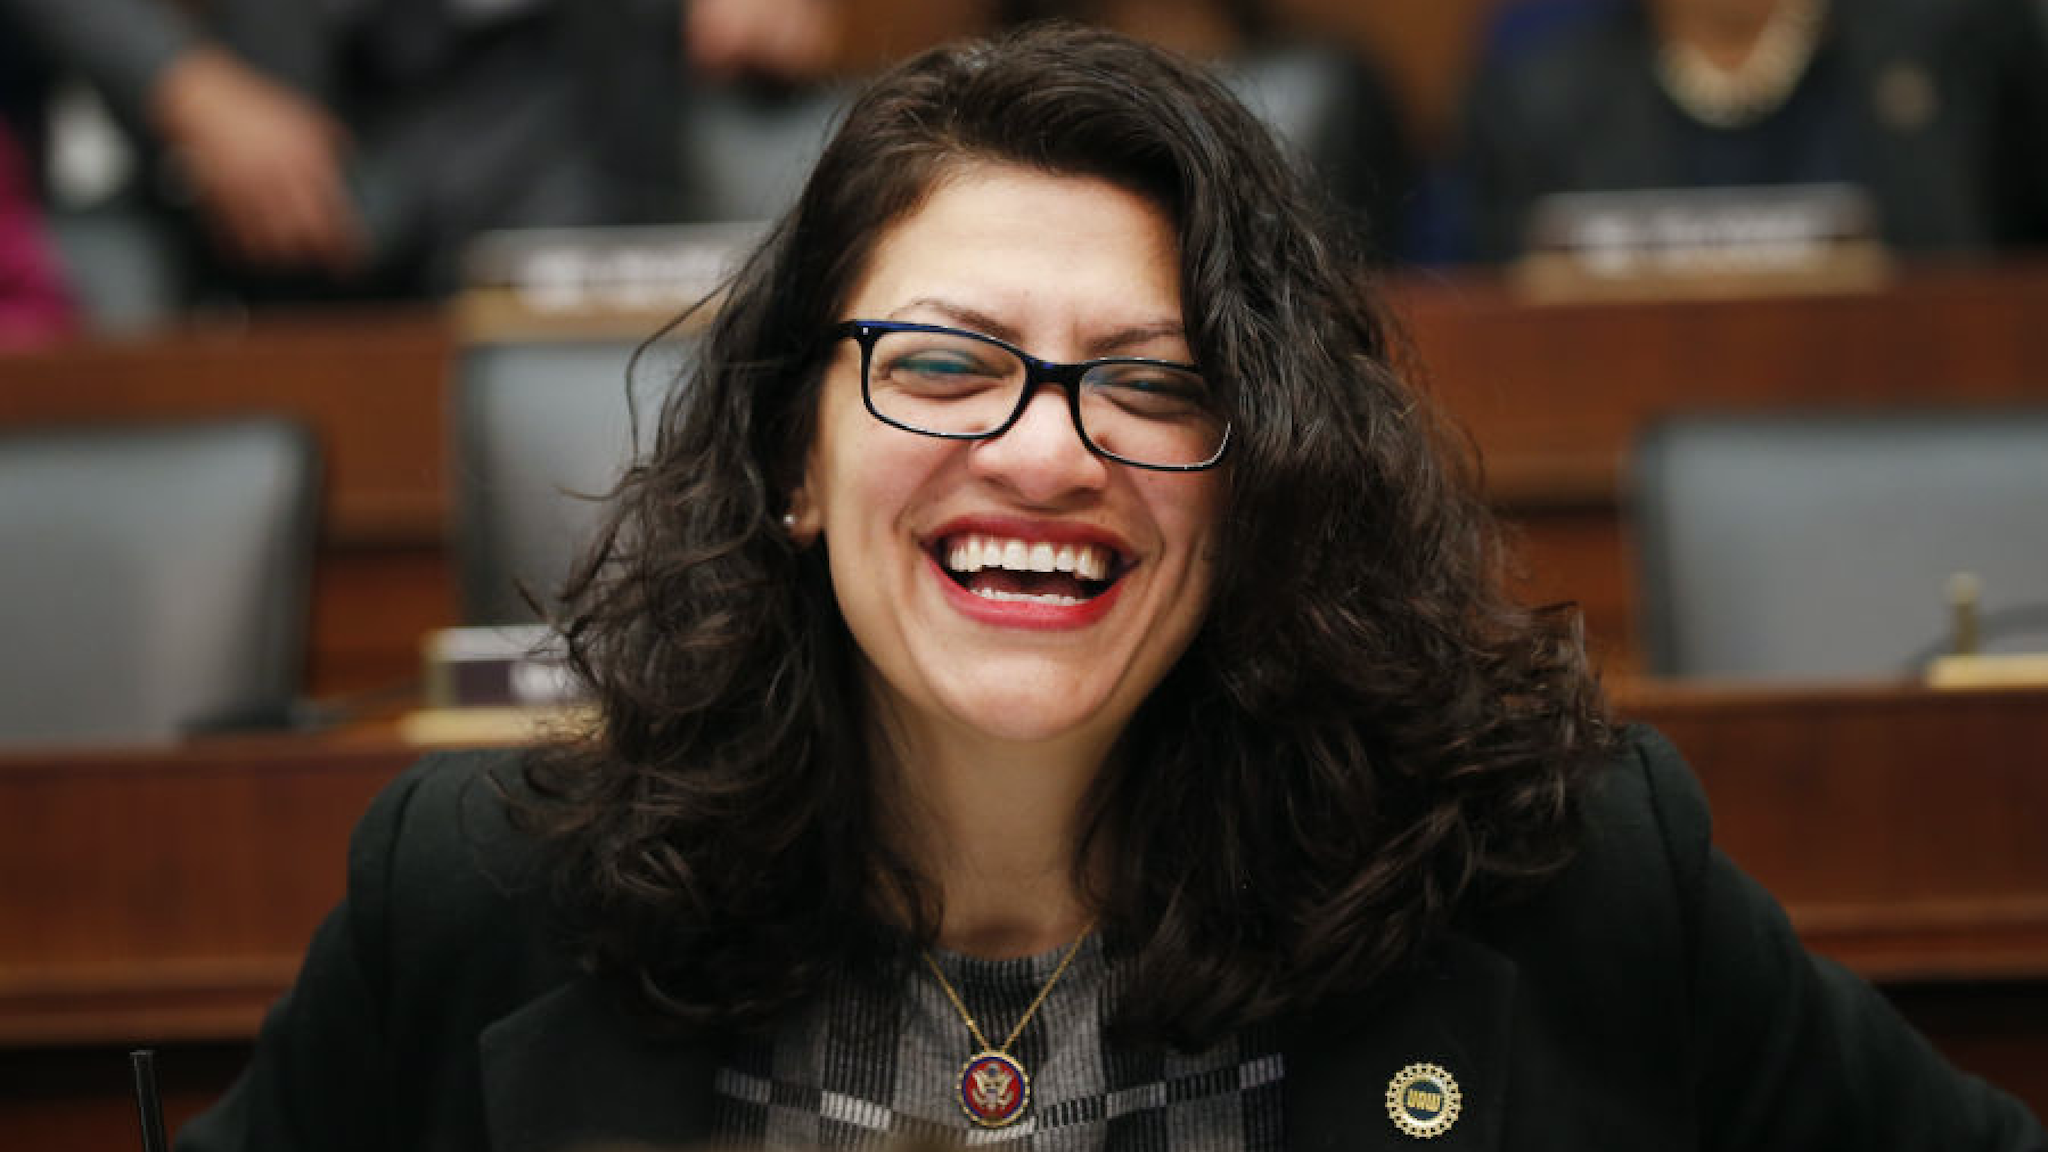 Representative Rashida Tlaib, a Democrat from Michigan, smiles before the start of a House Financial Services Committee hearing with Mark Zuckerberg, chief executive officer and founder of Facebook Inc., in Washington, D.C., U.S., on Wednesday, Oct. 23, 2019.